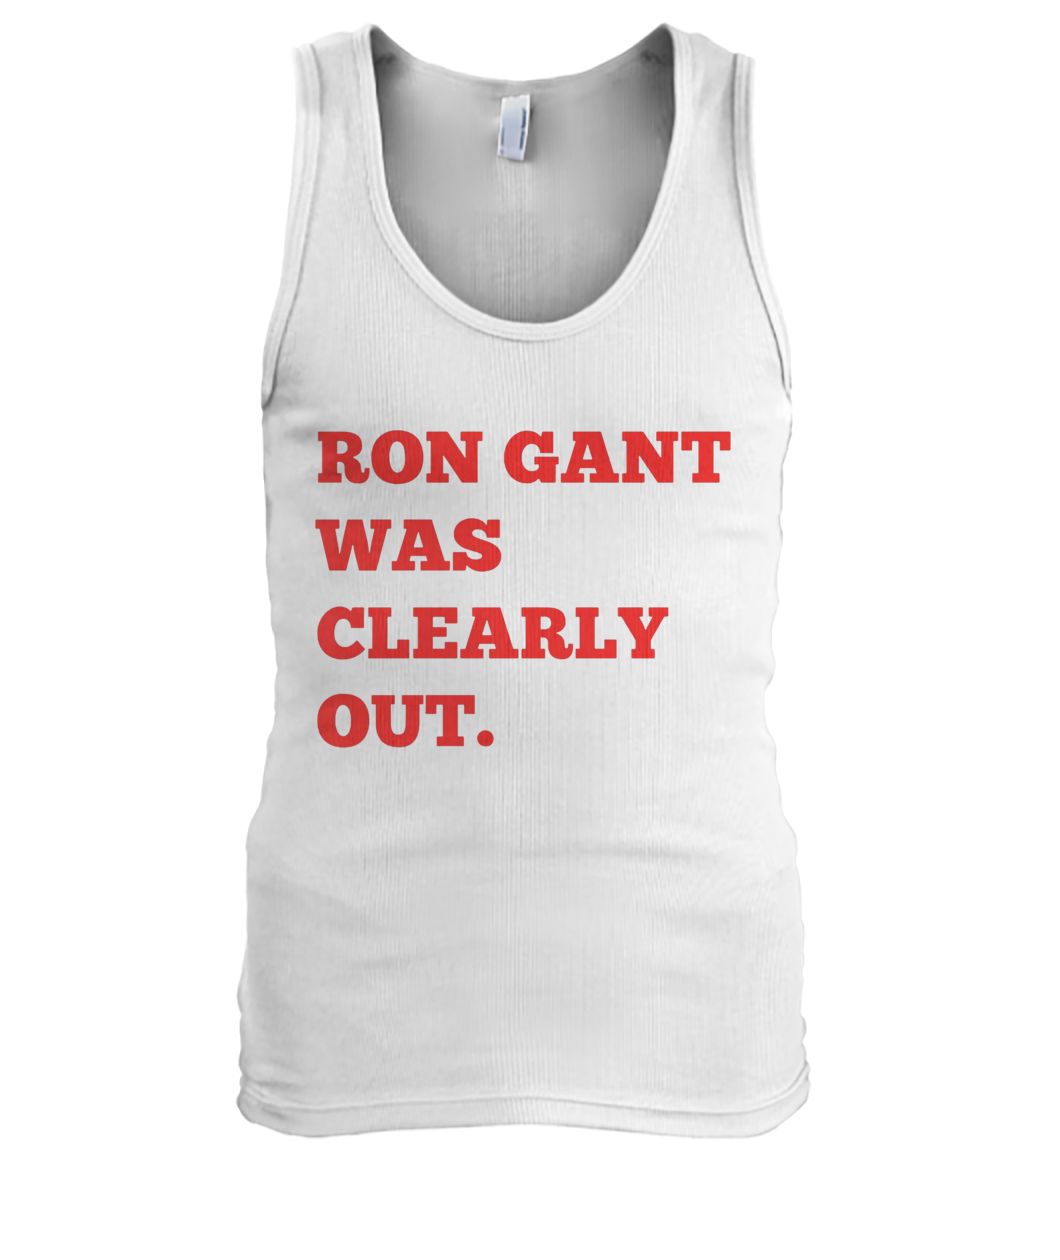 Ron gant was clearly out men's tank top